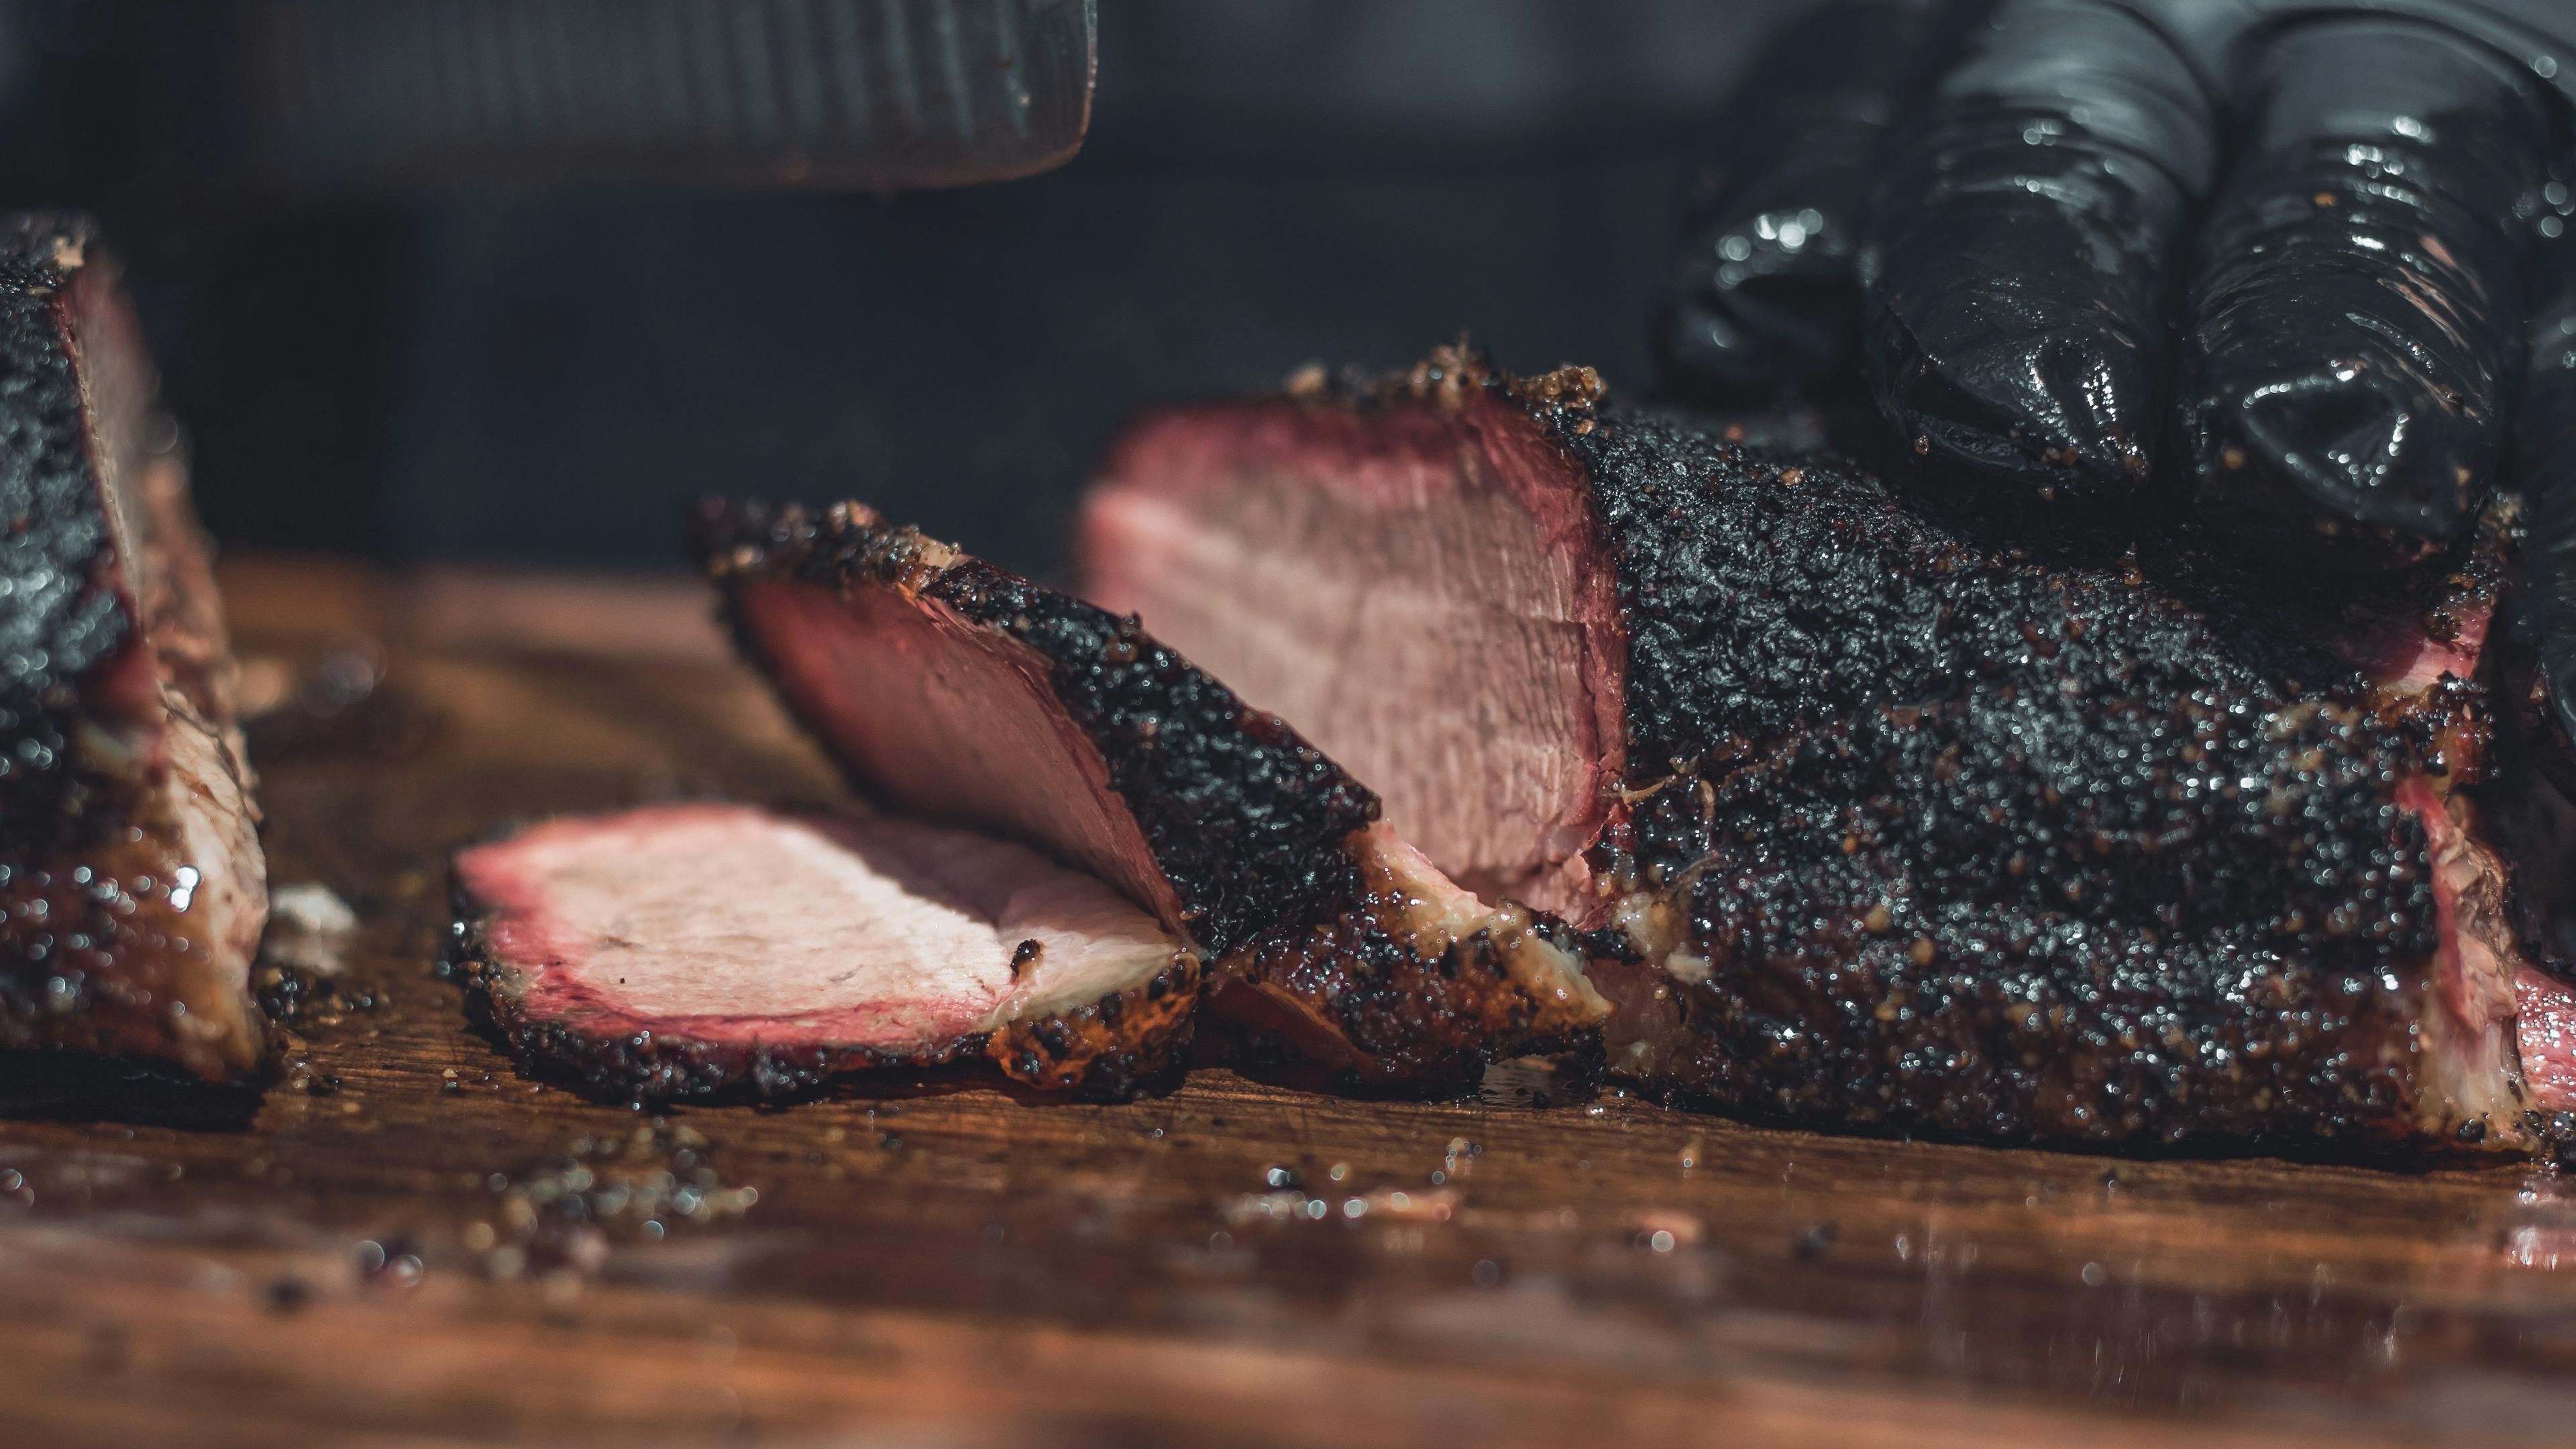 Recipe - Sous Vide - Smoked -  BBQ'd Brisket  (We call this recipe, "The Engineer")